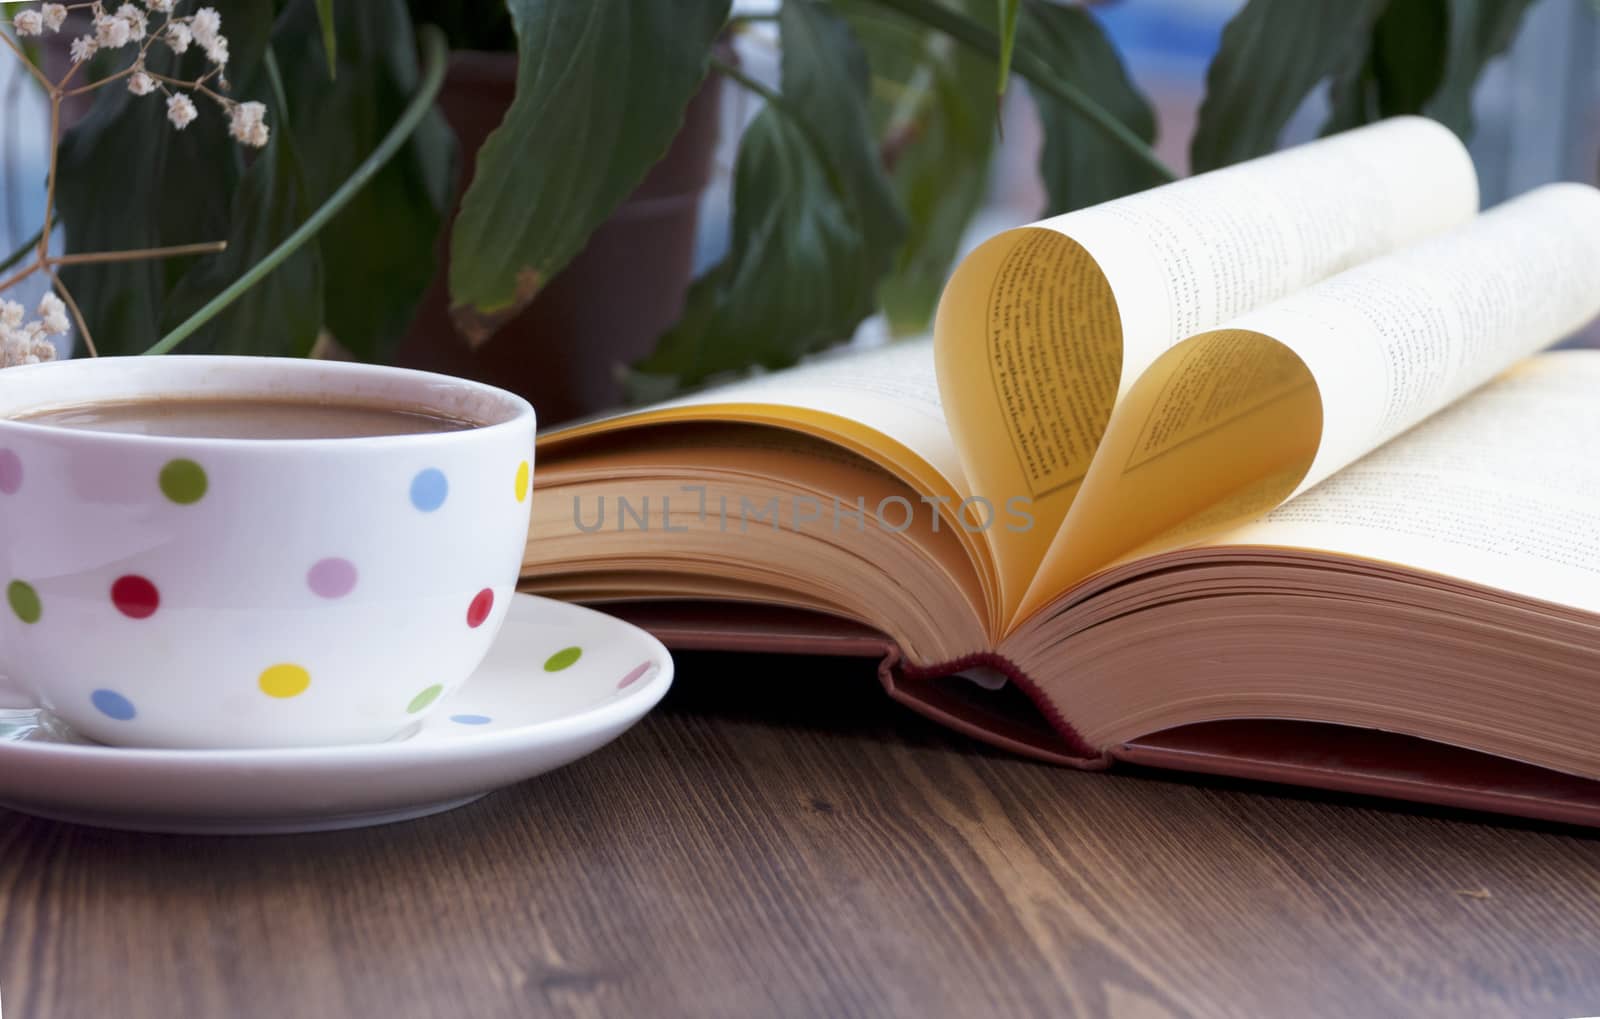 Love Books and Coffee by MelekKalyoncu